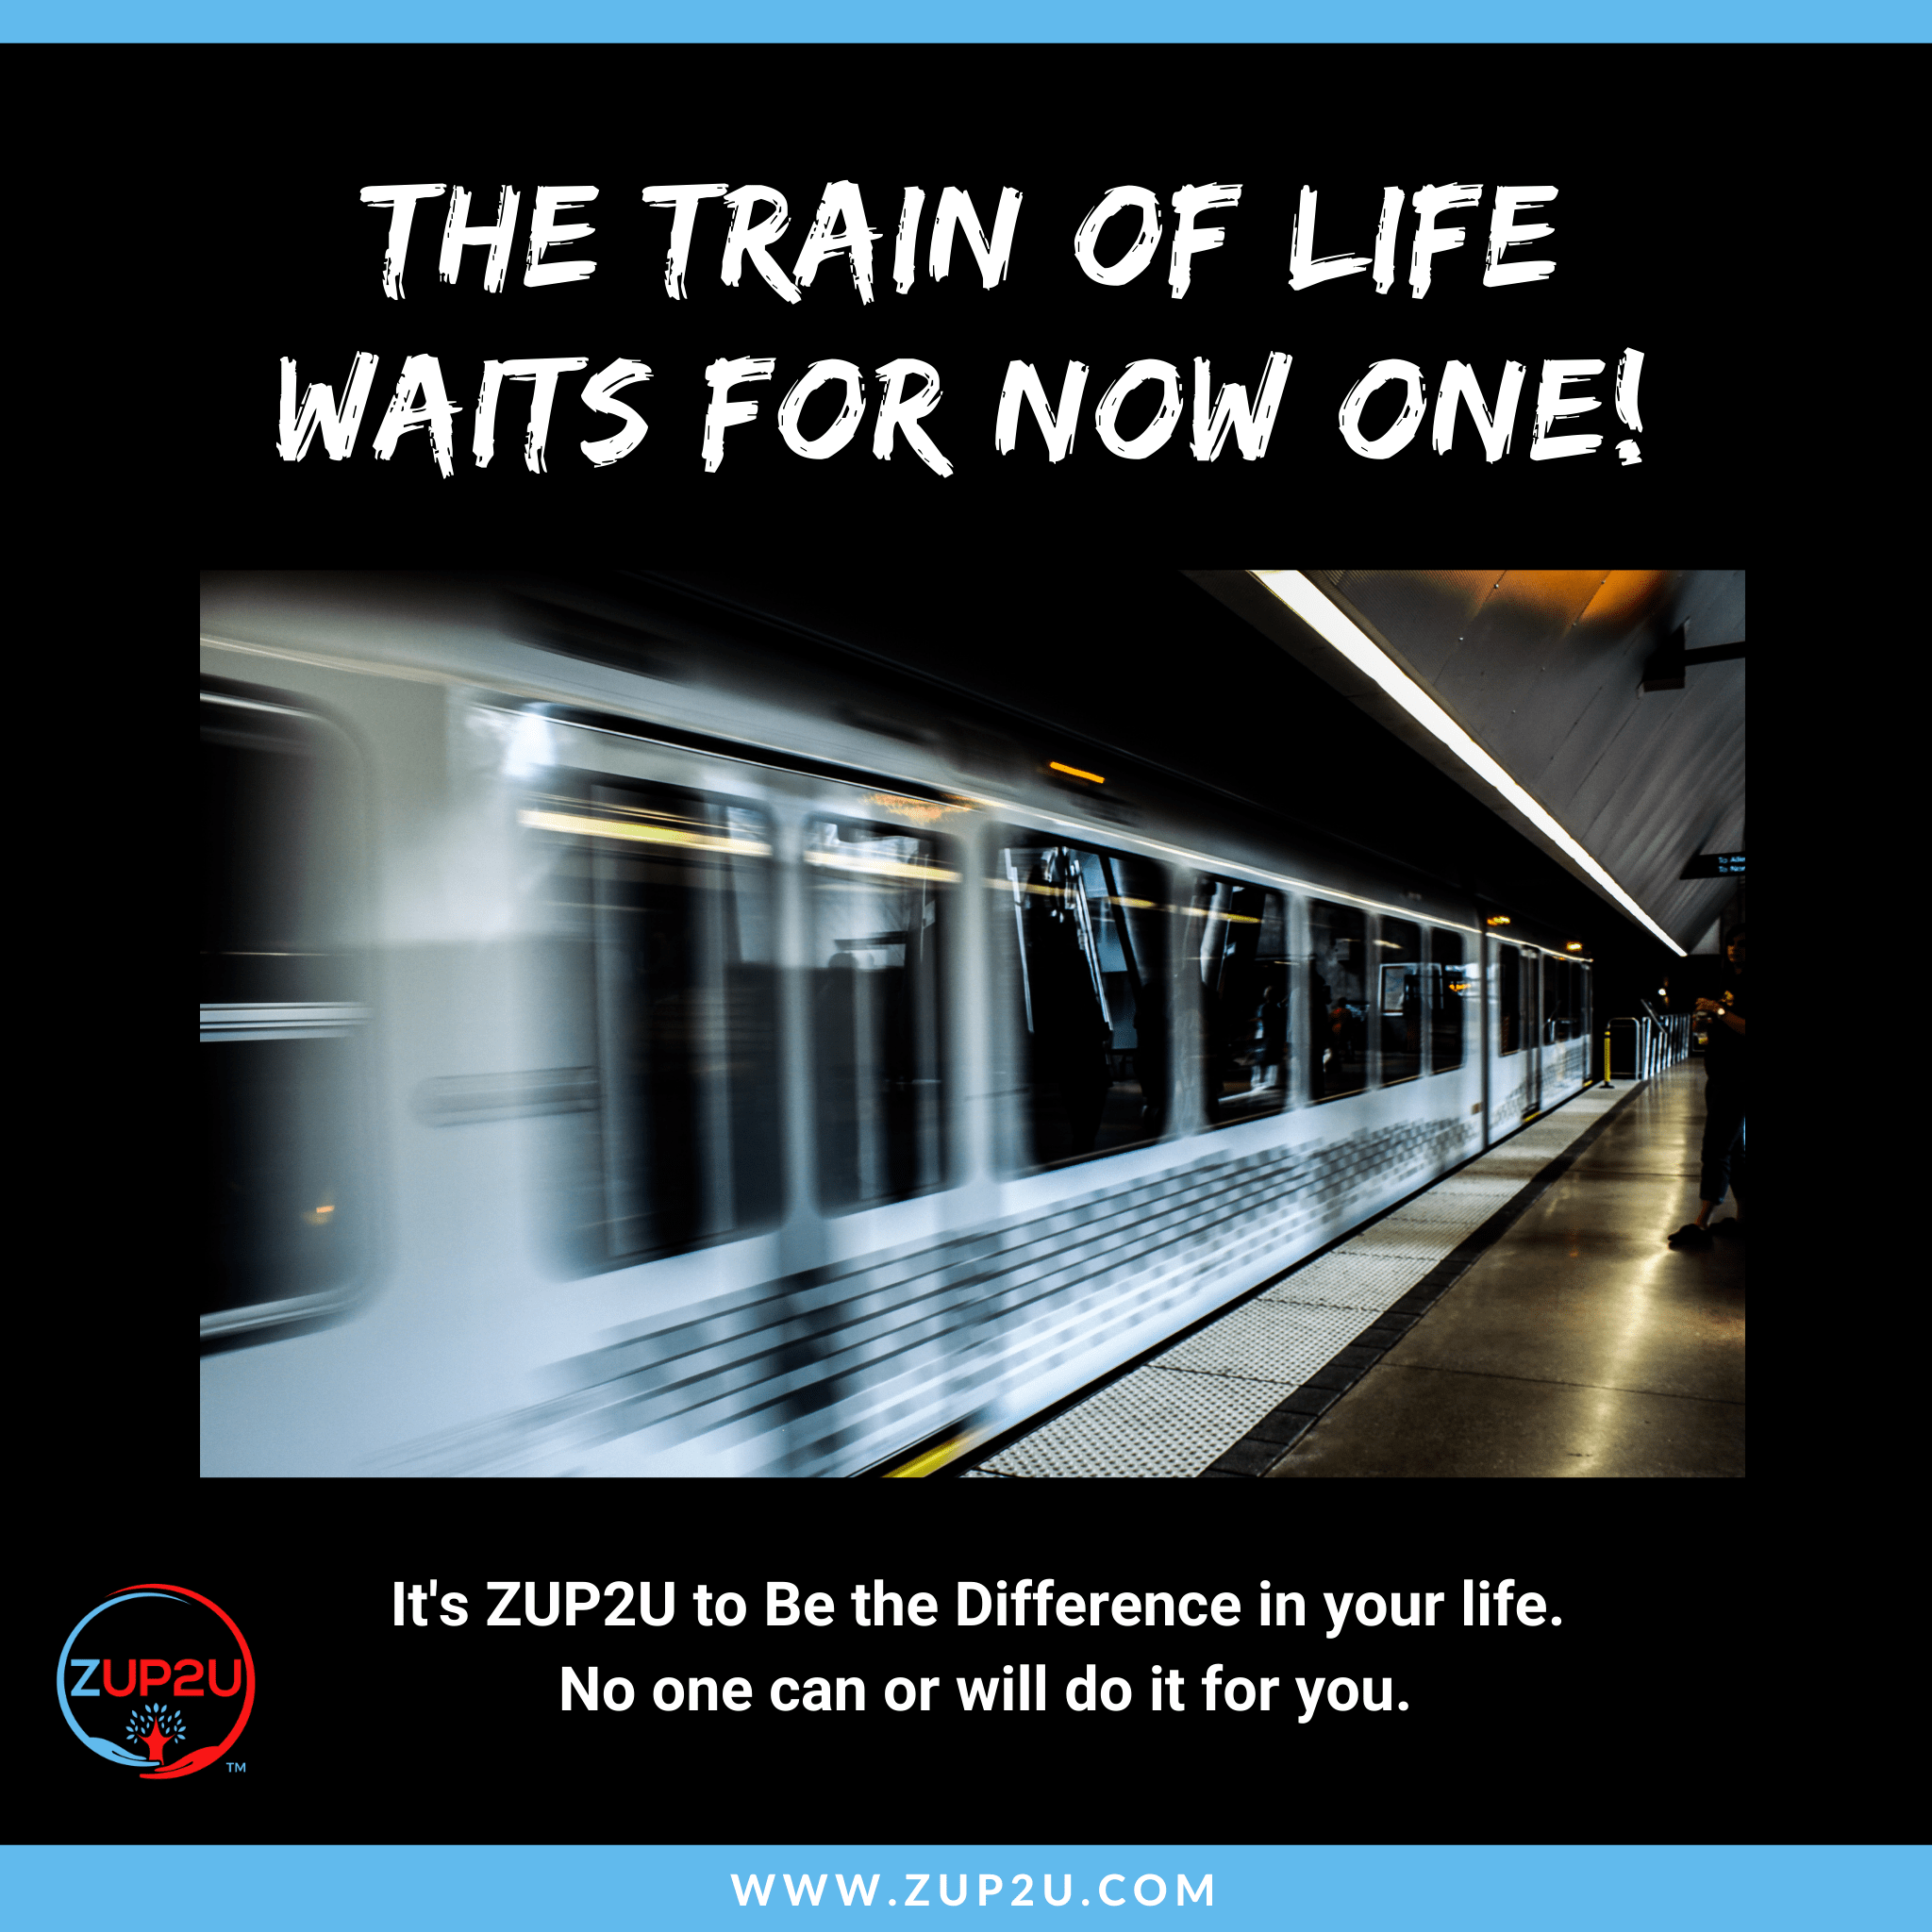 The Train of Life Waits for Now One!